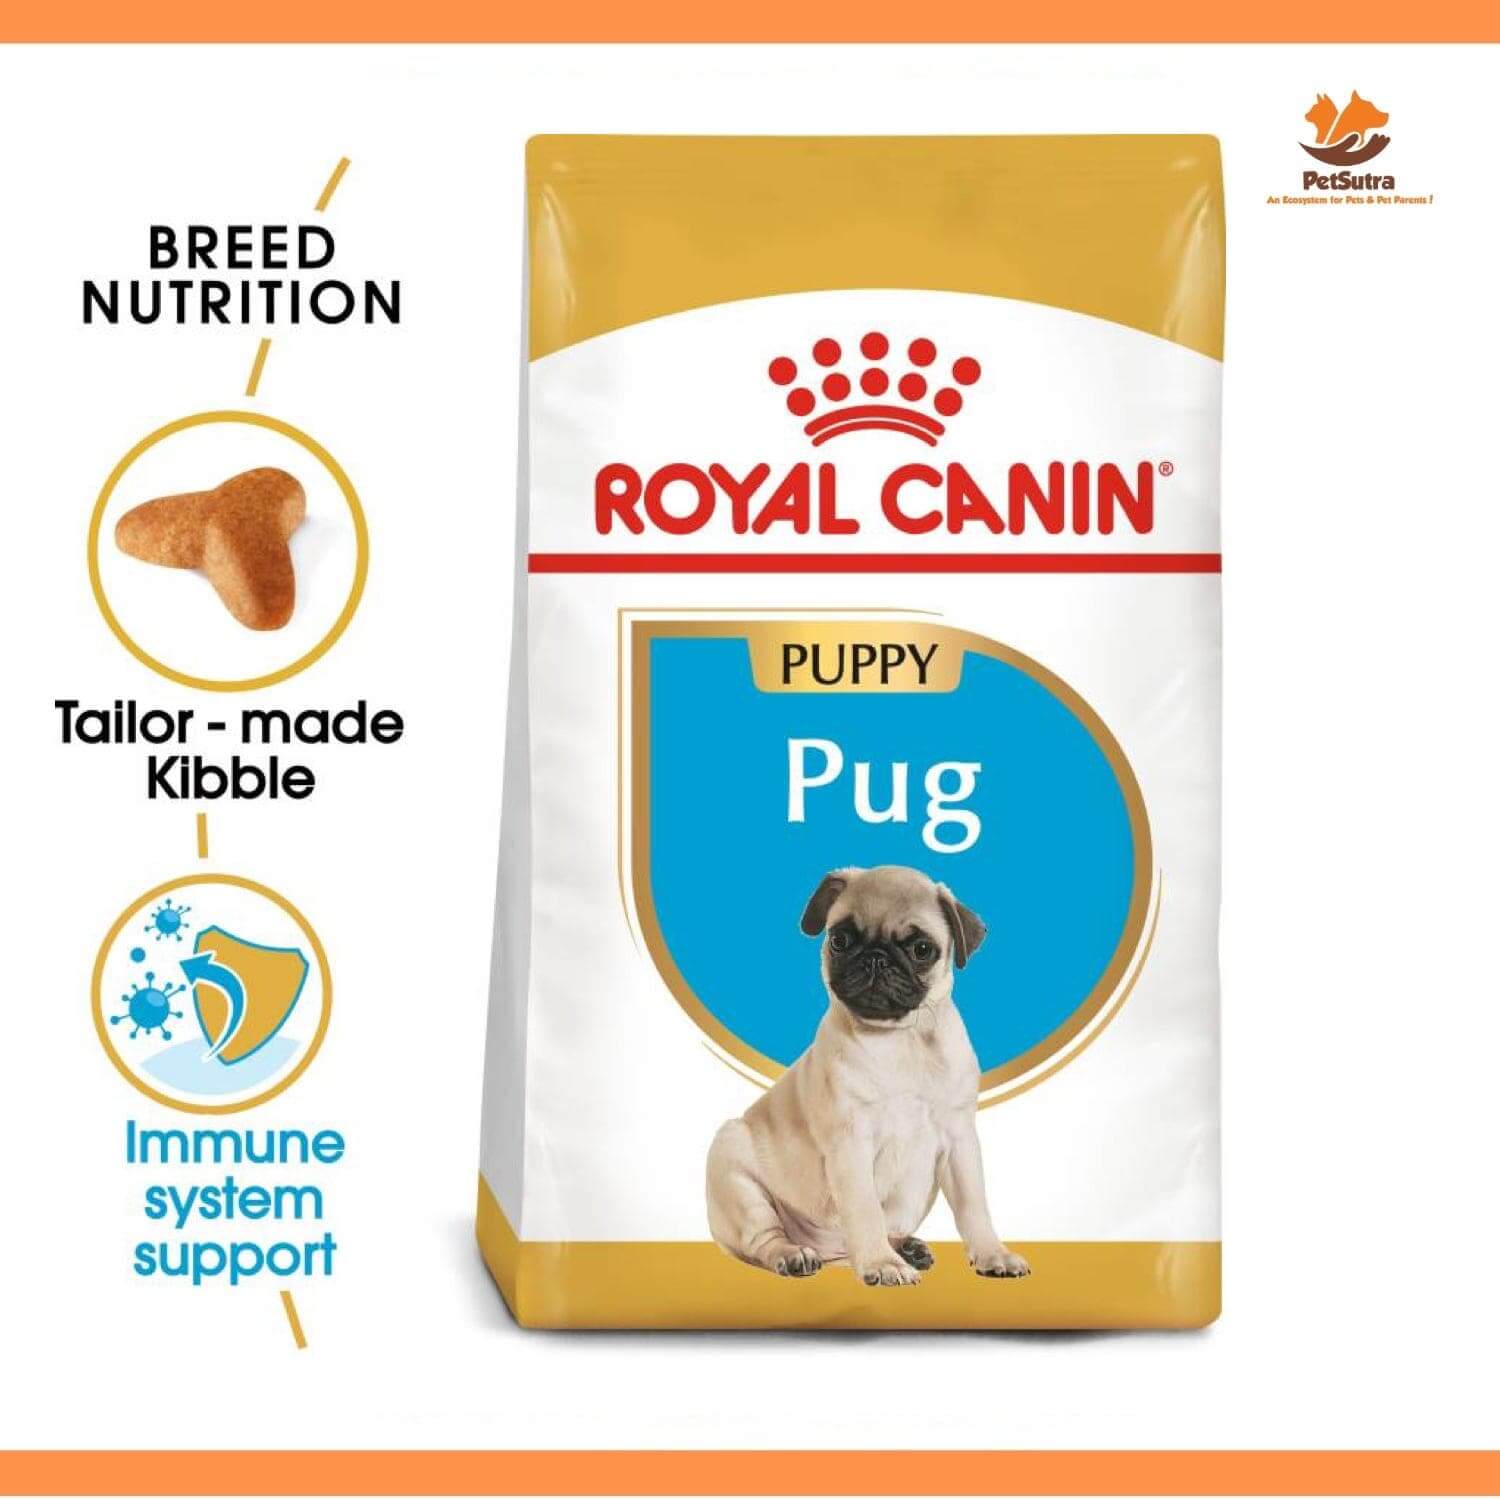 Buy Royal Canin Pug Puppy 1.5 kg Dry Food Online on PetSutra